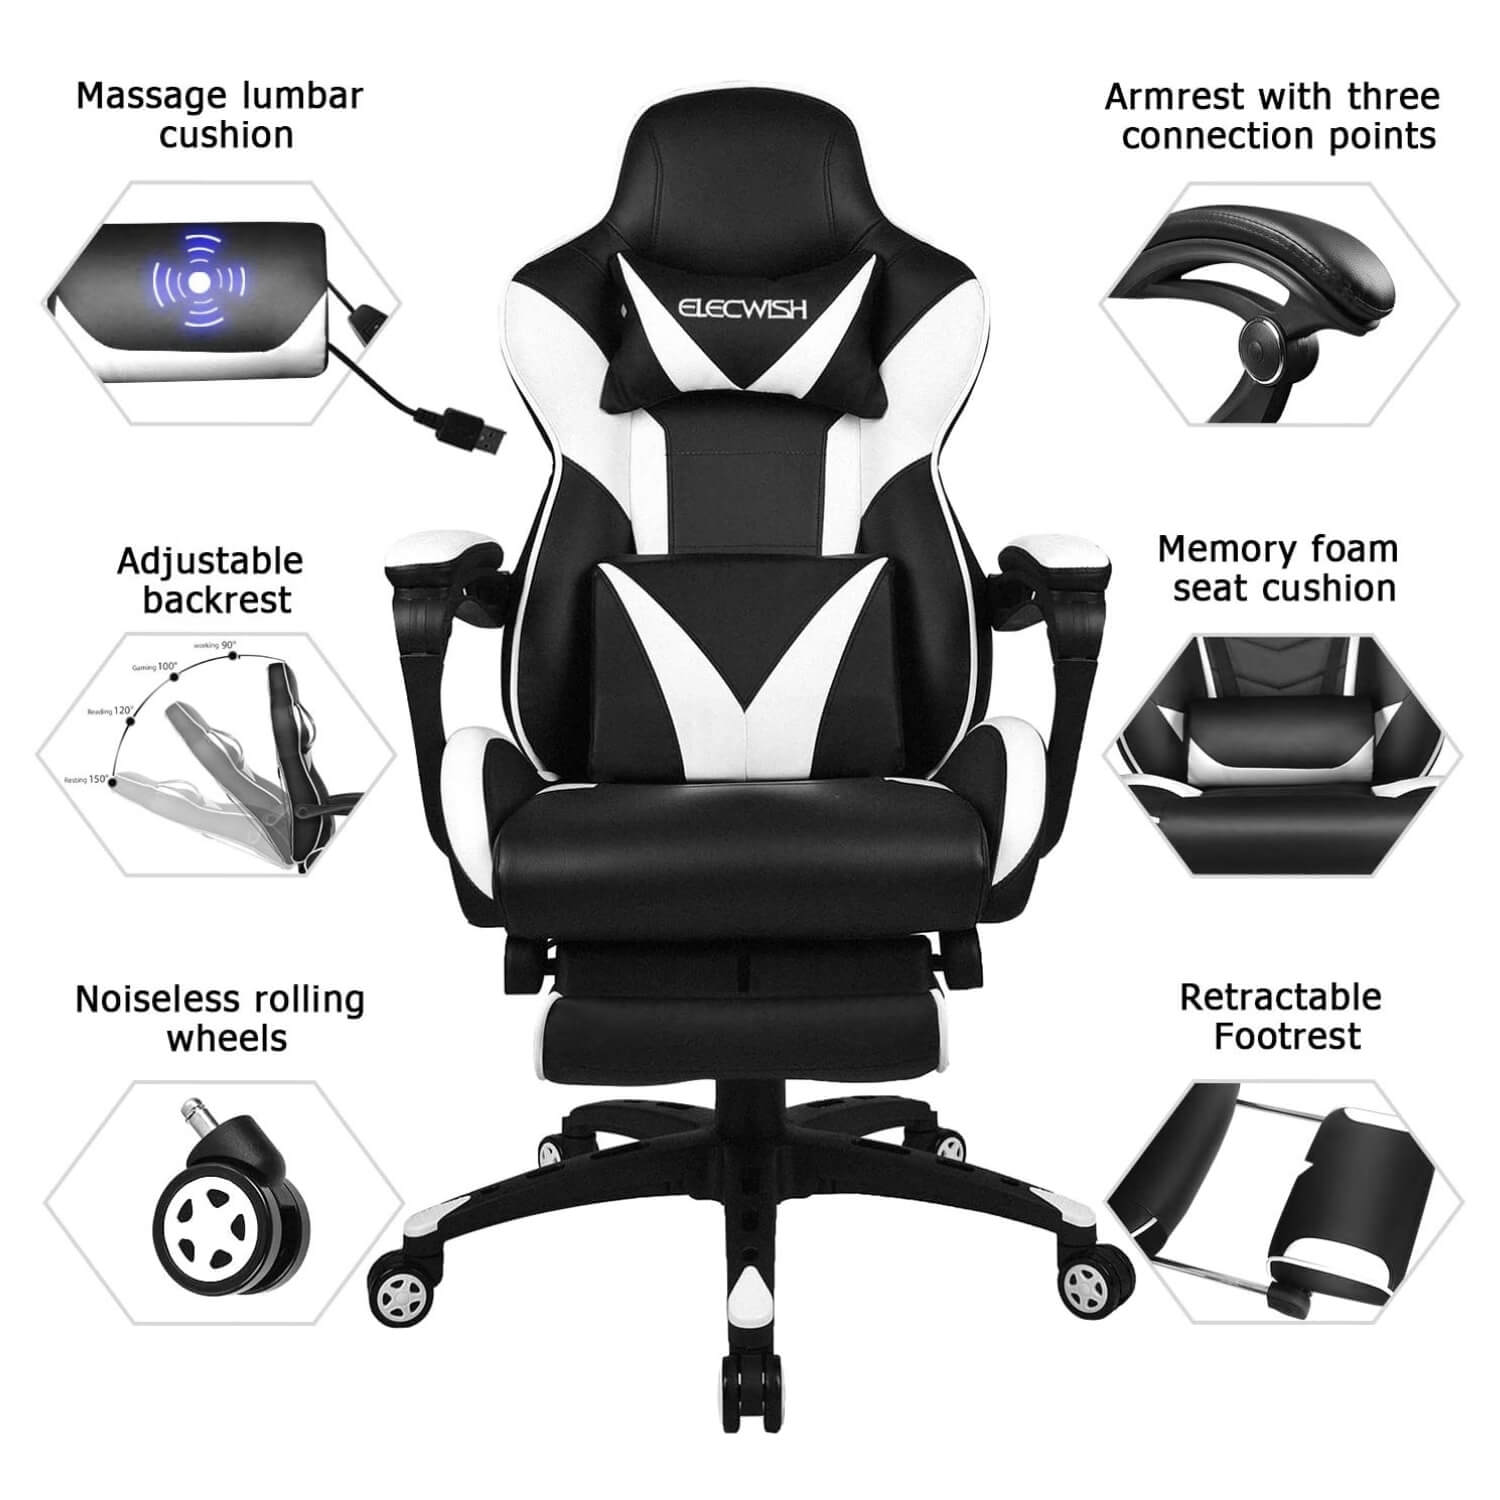 Six features of Elecwish white massage gaming chair with footrest OC112